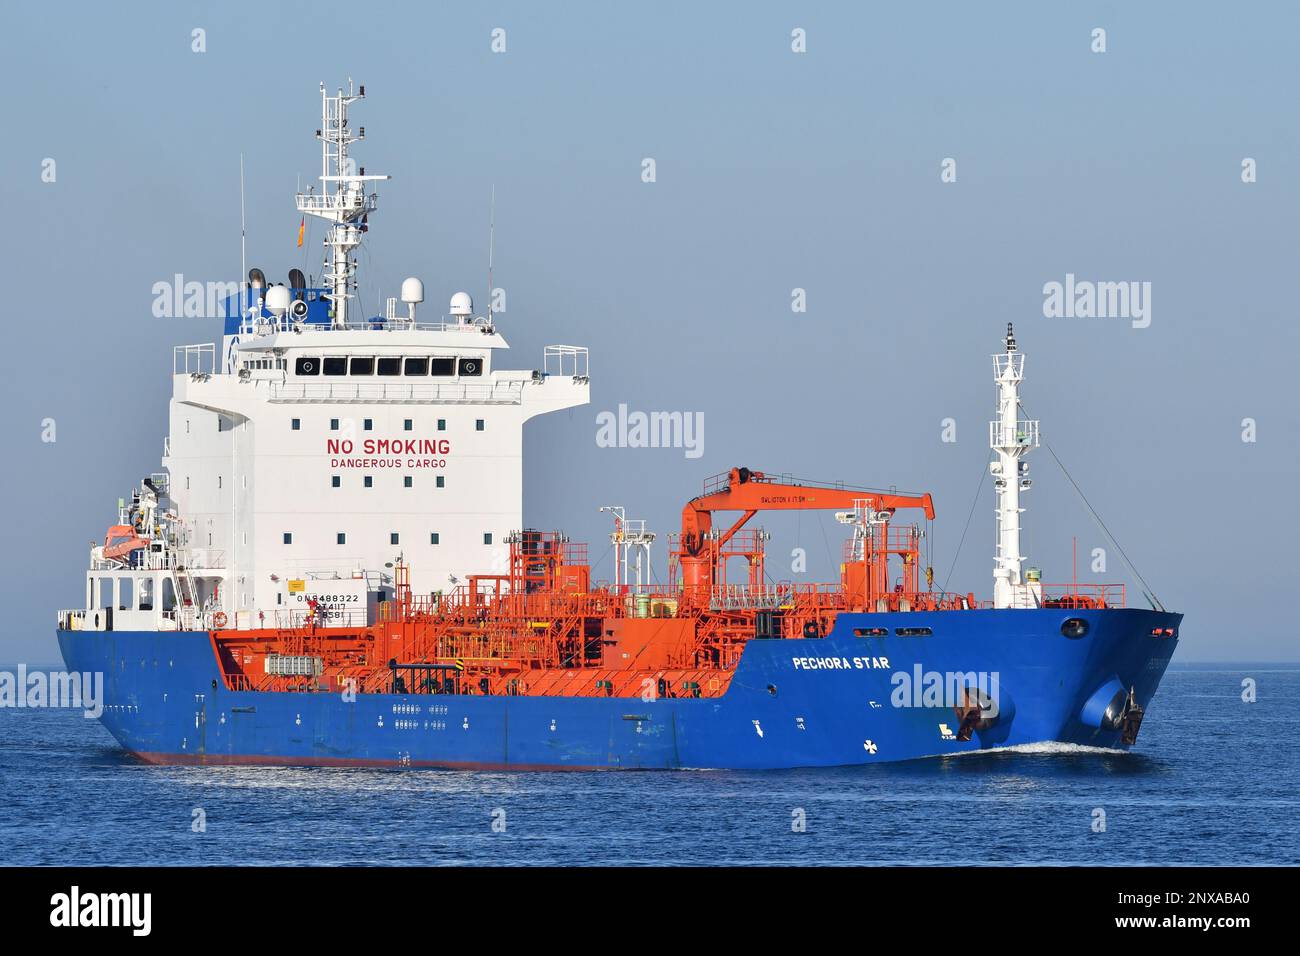 Chemical/Oil Products Tanker PECHORA STAR Stock Photo